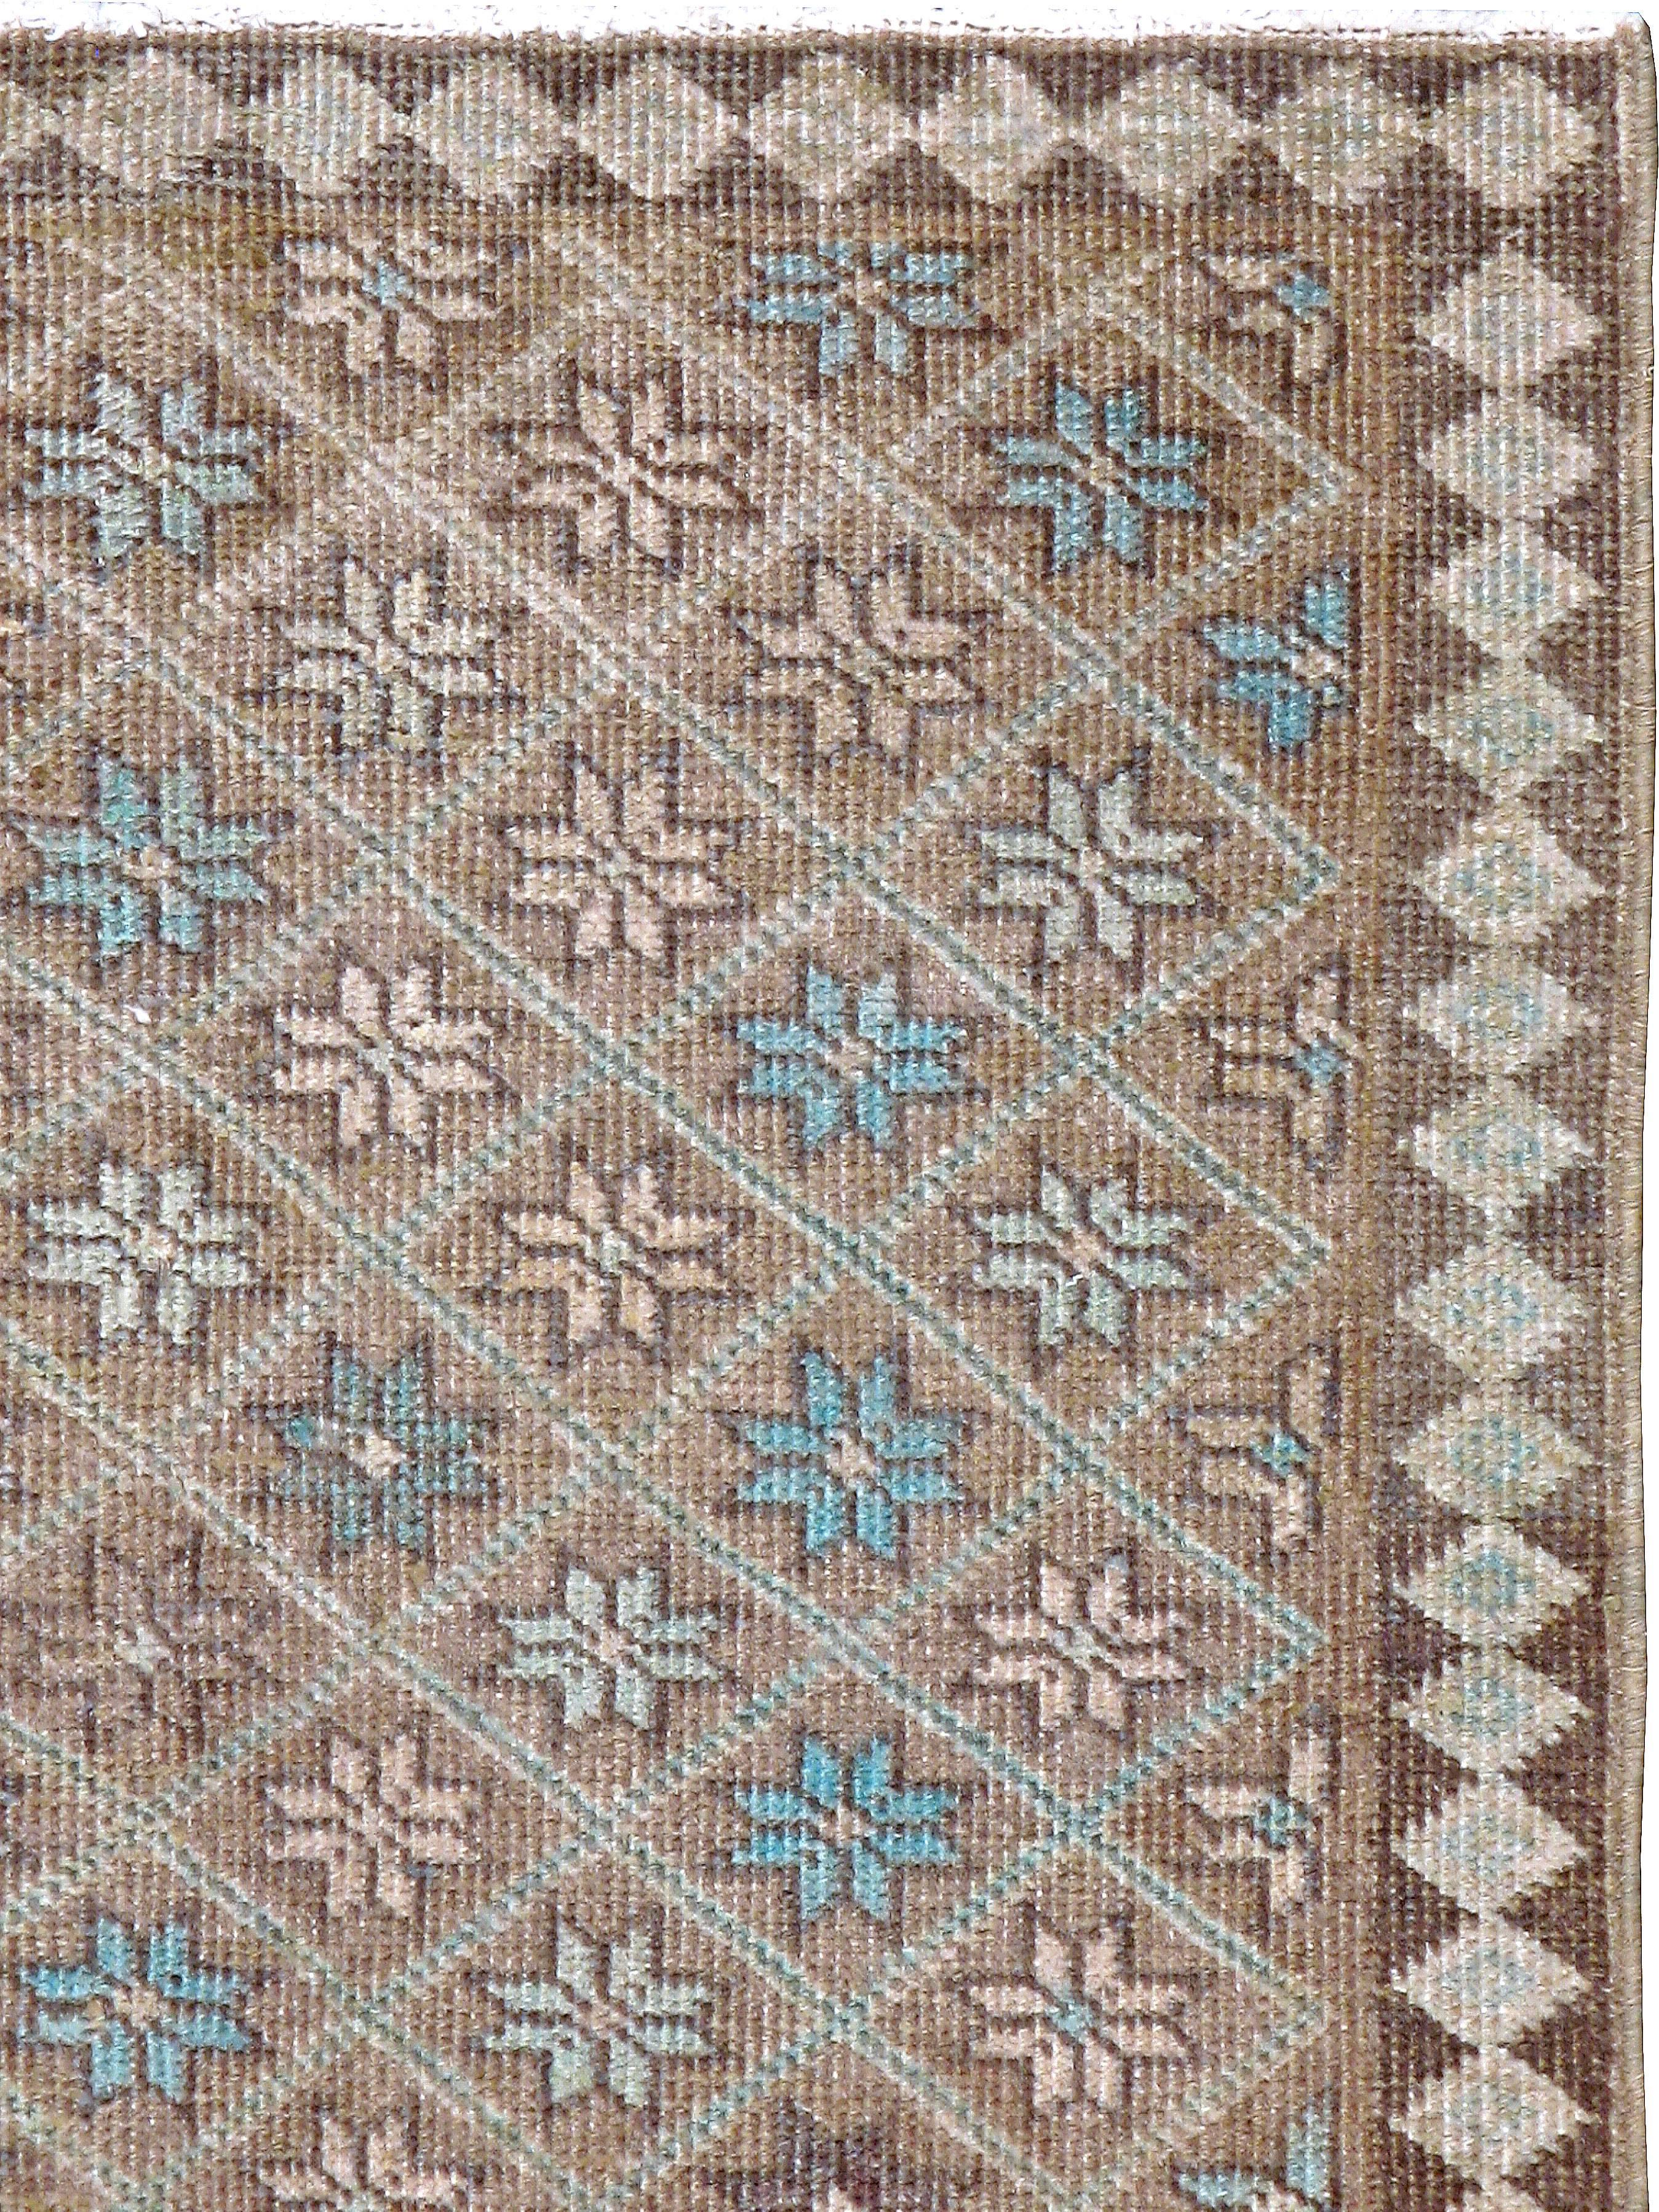 A mid-20th century Persian Tabriz carpet in the style of Turkish Damali rugs. Damali rugs are typically in a checkered or diamond-checkered pattern, hence the name 